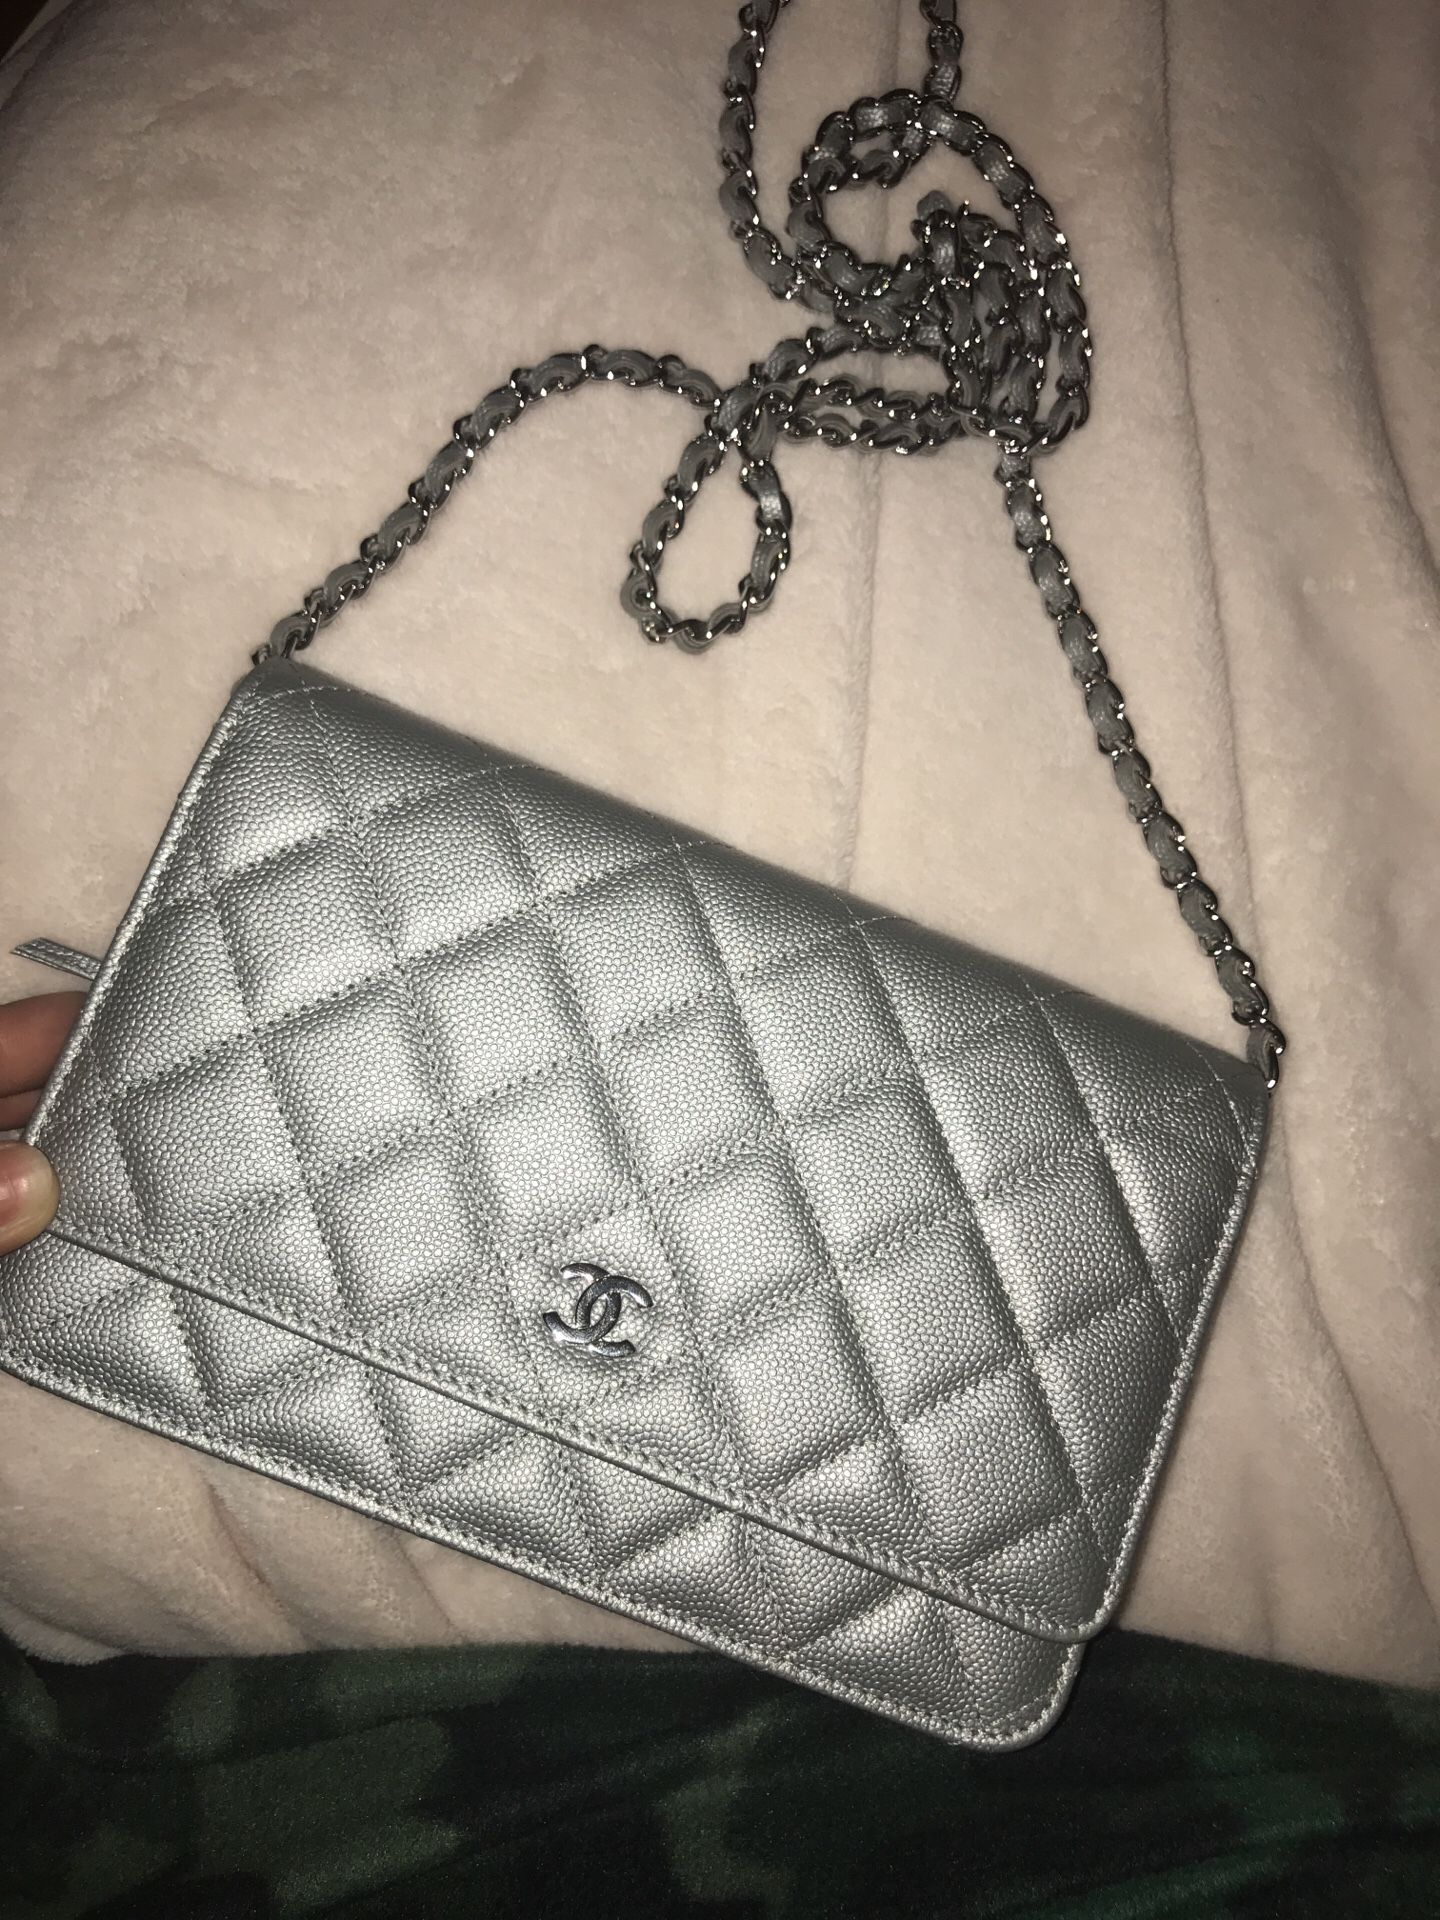 Chanel Wallet for Sale in San Jose, CA - OfferUp